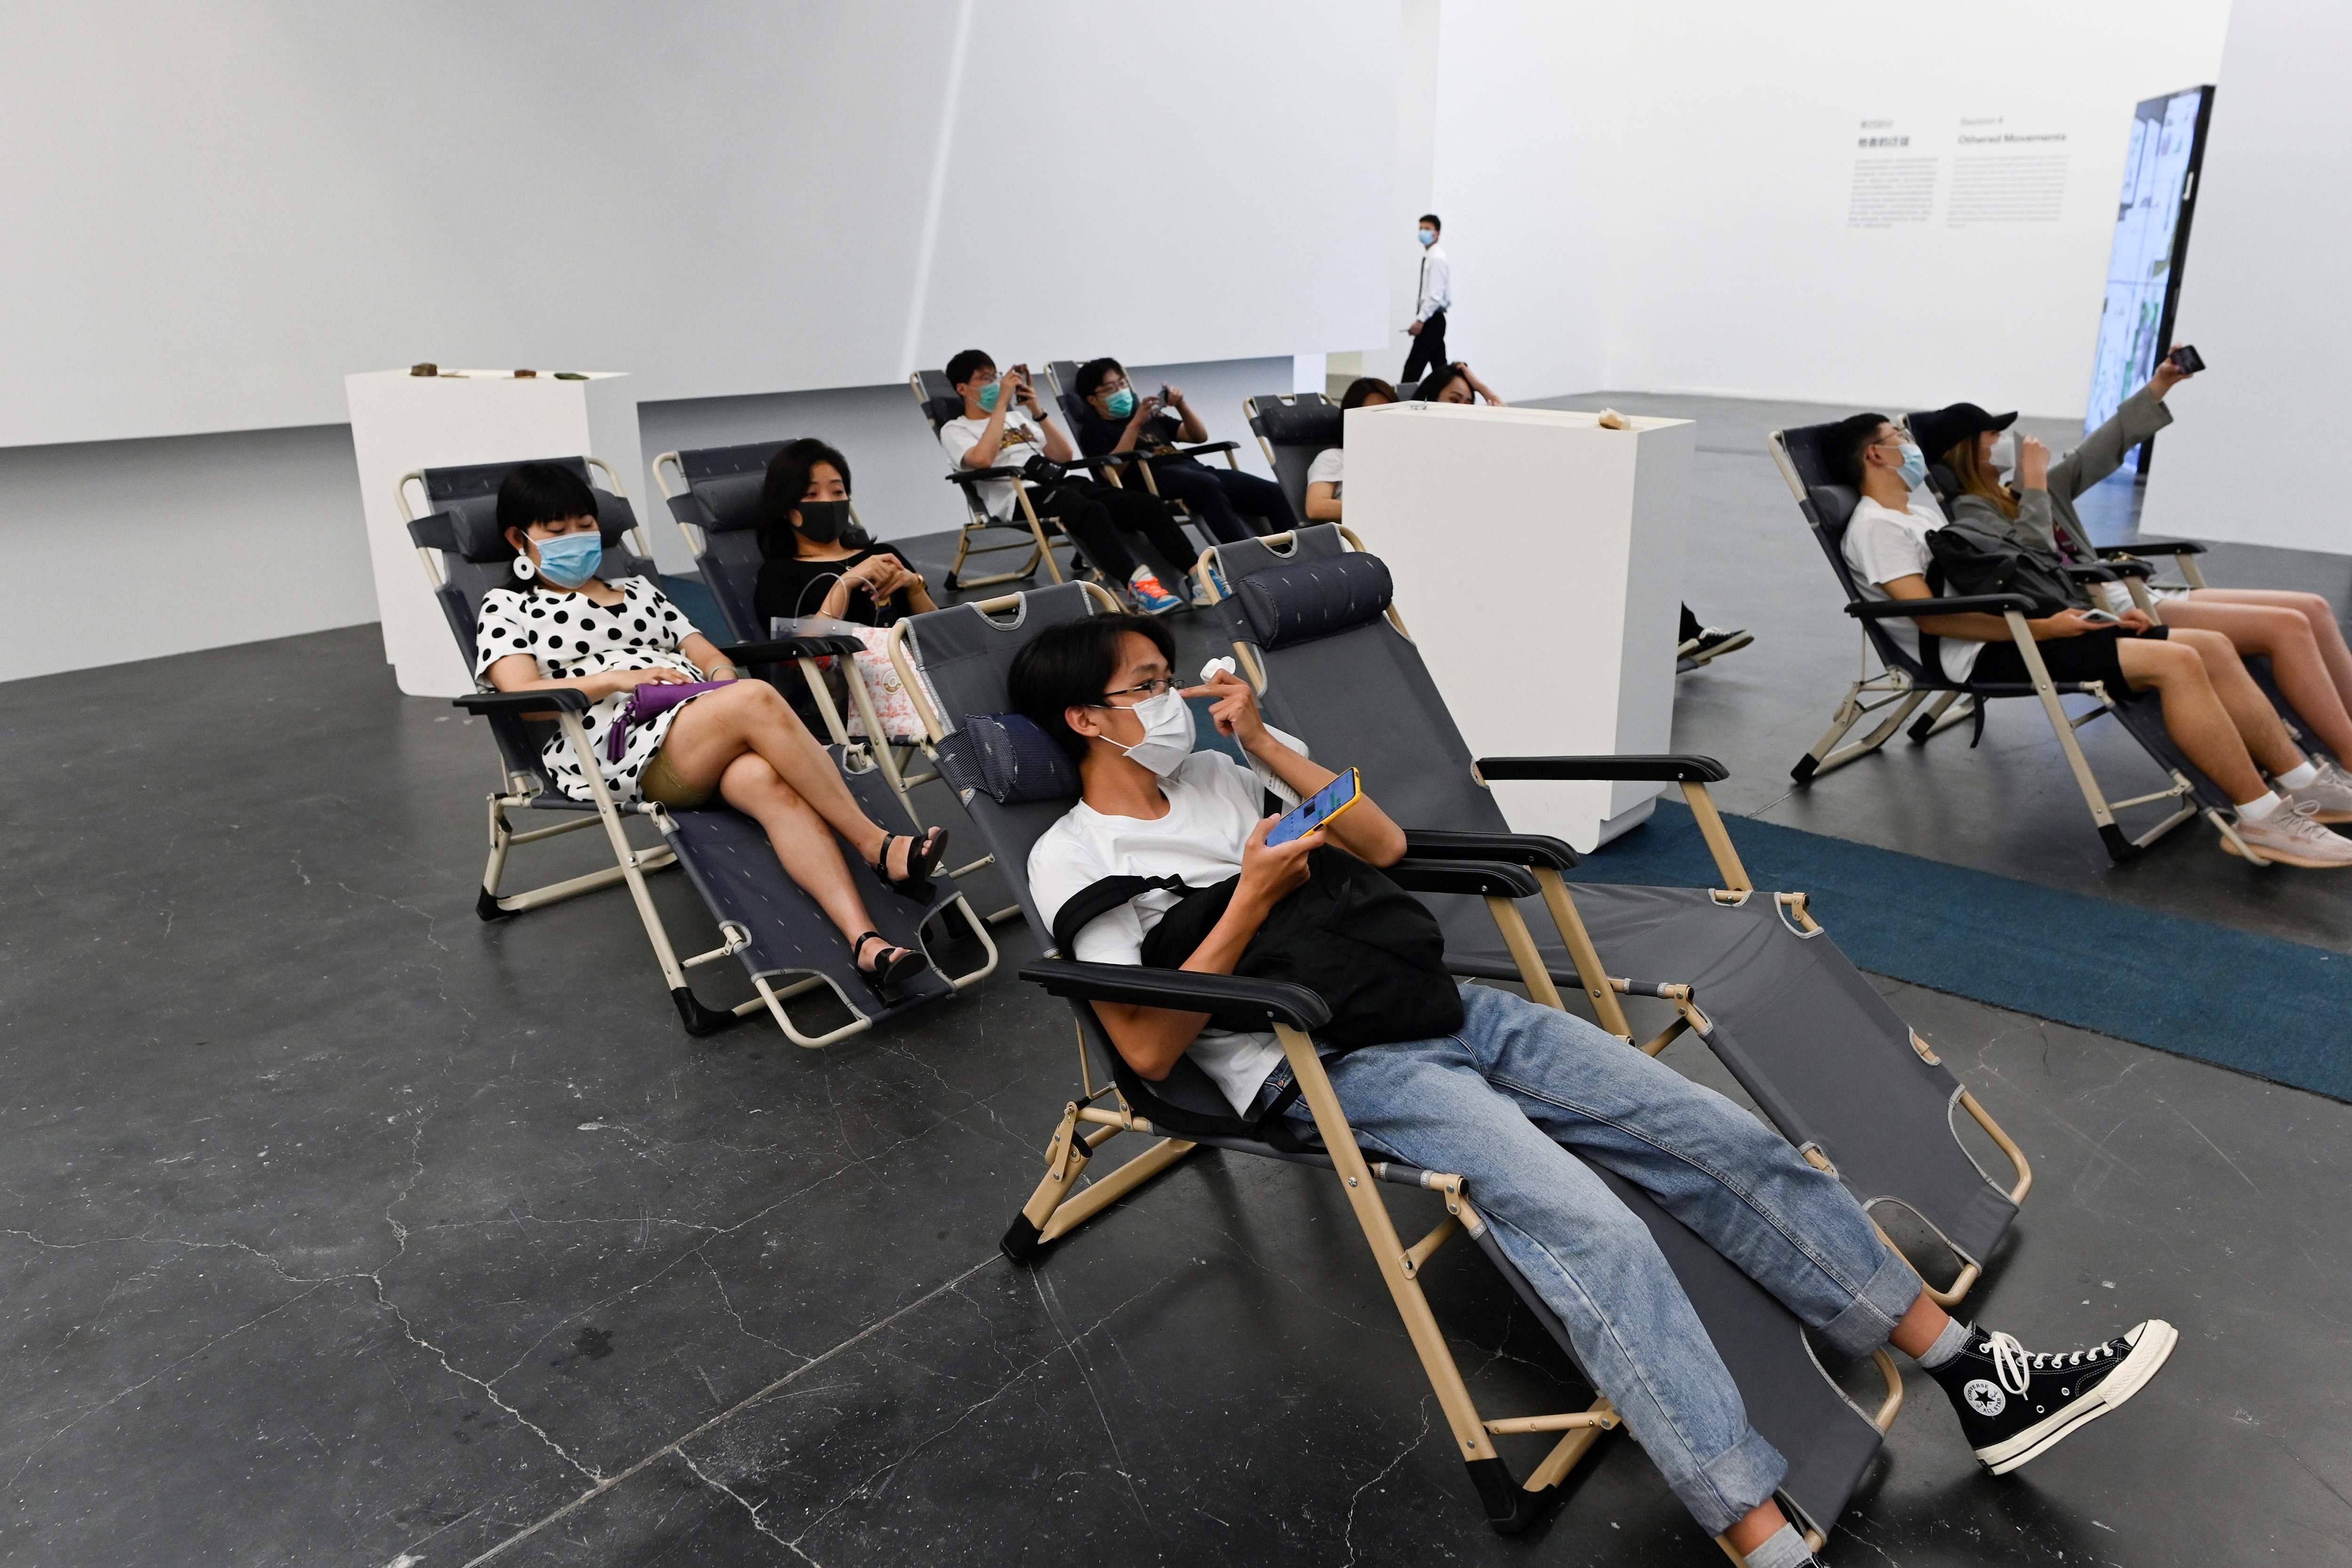 Visitors wearing face masks amid concerns of the COVID-19 coronavirus rest on chairs at the exhibition 'Meditations in an Emergency' at UCCA Center for Contemporary Art in Beijing. Credits: AFP Photo